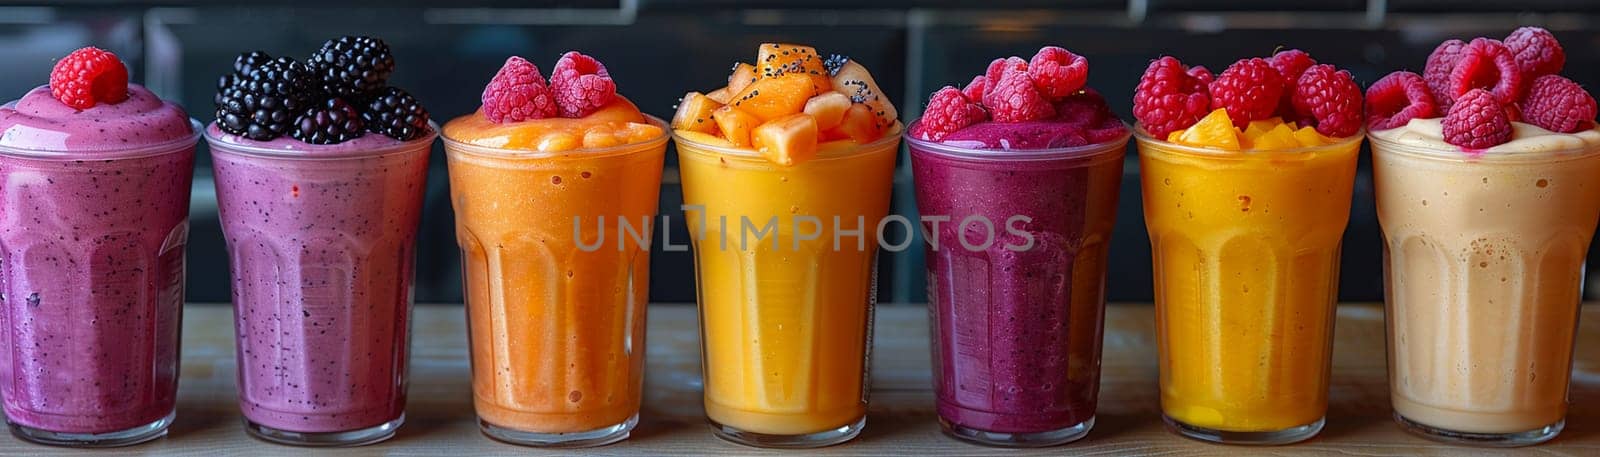 Smoothie Bar Blends Nutrition in Business of Health-Conscious Snacking by Benzoix